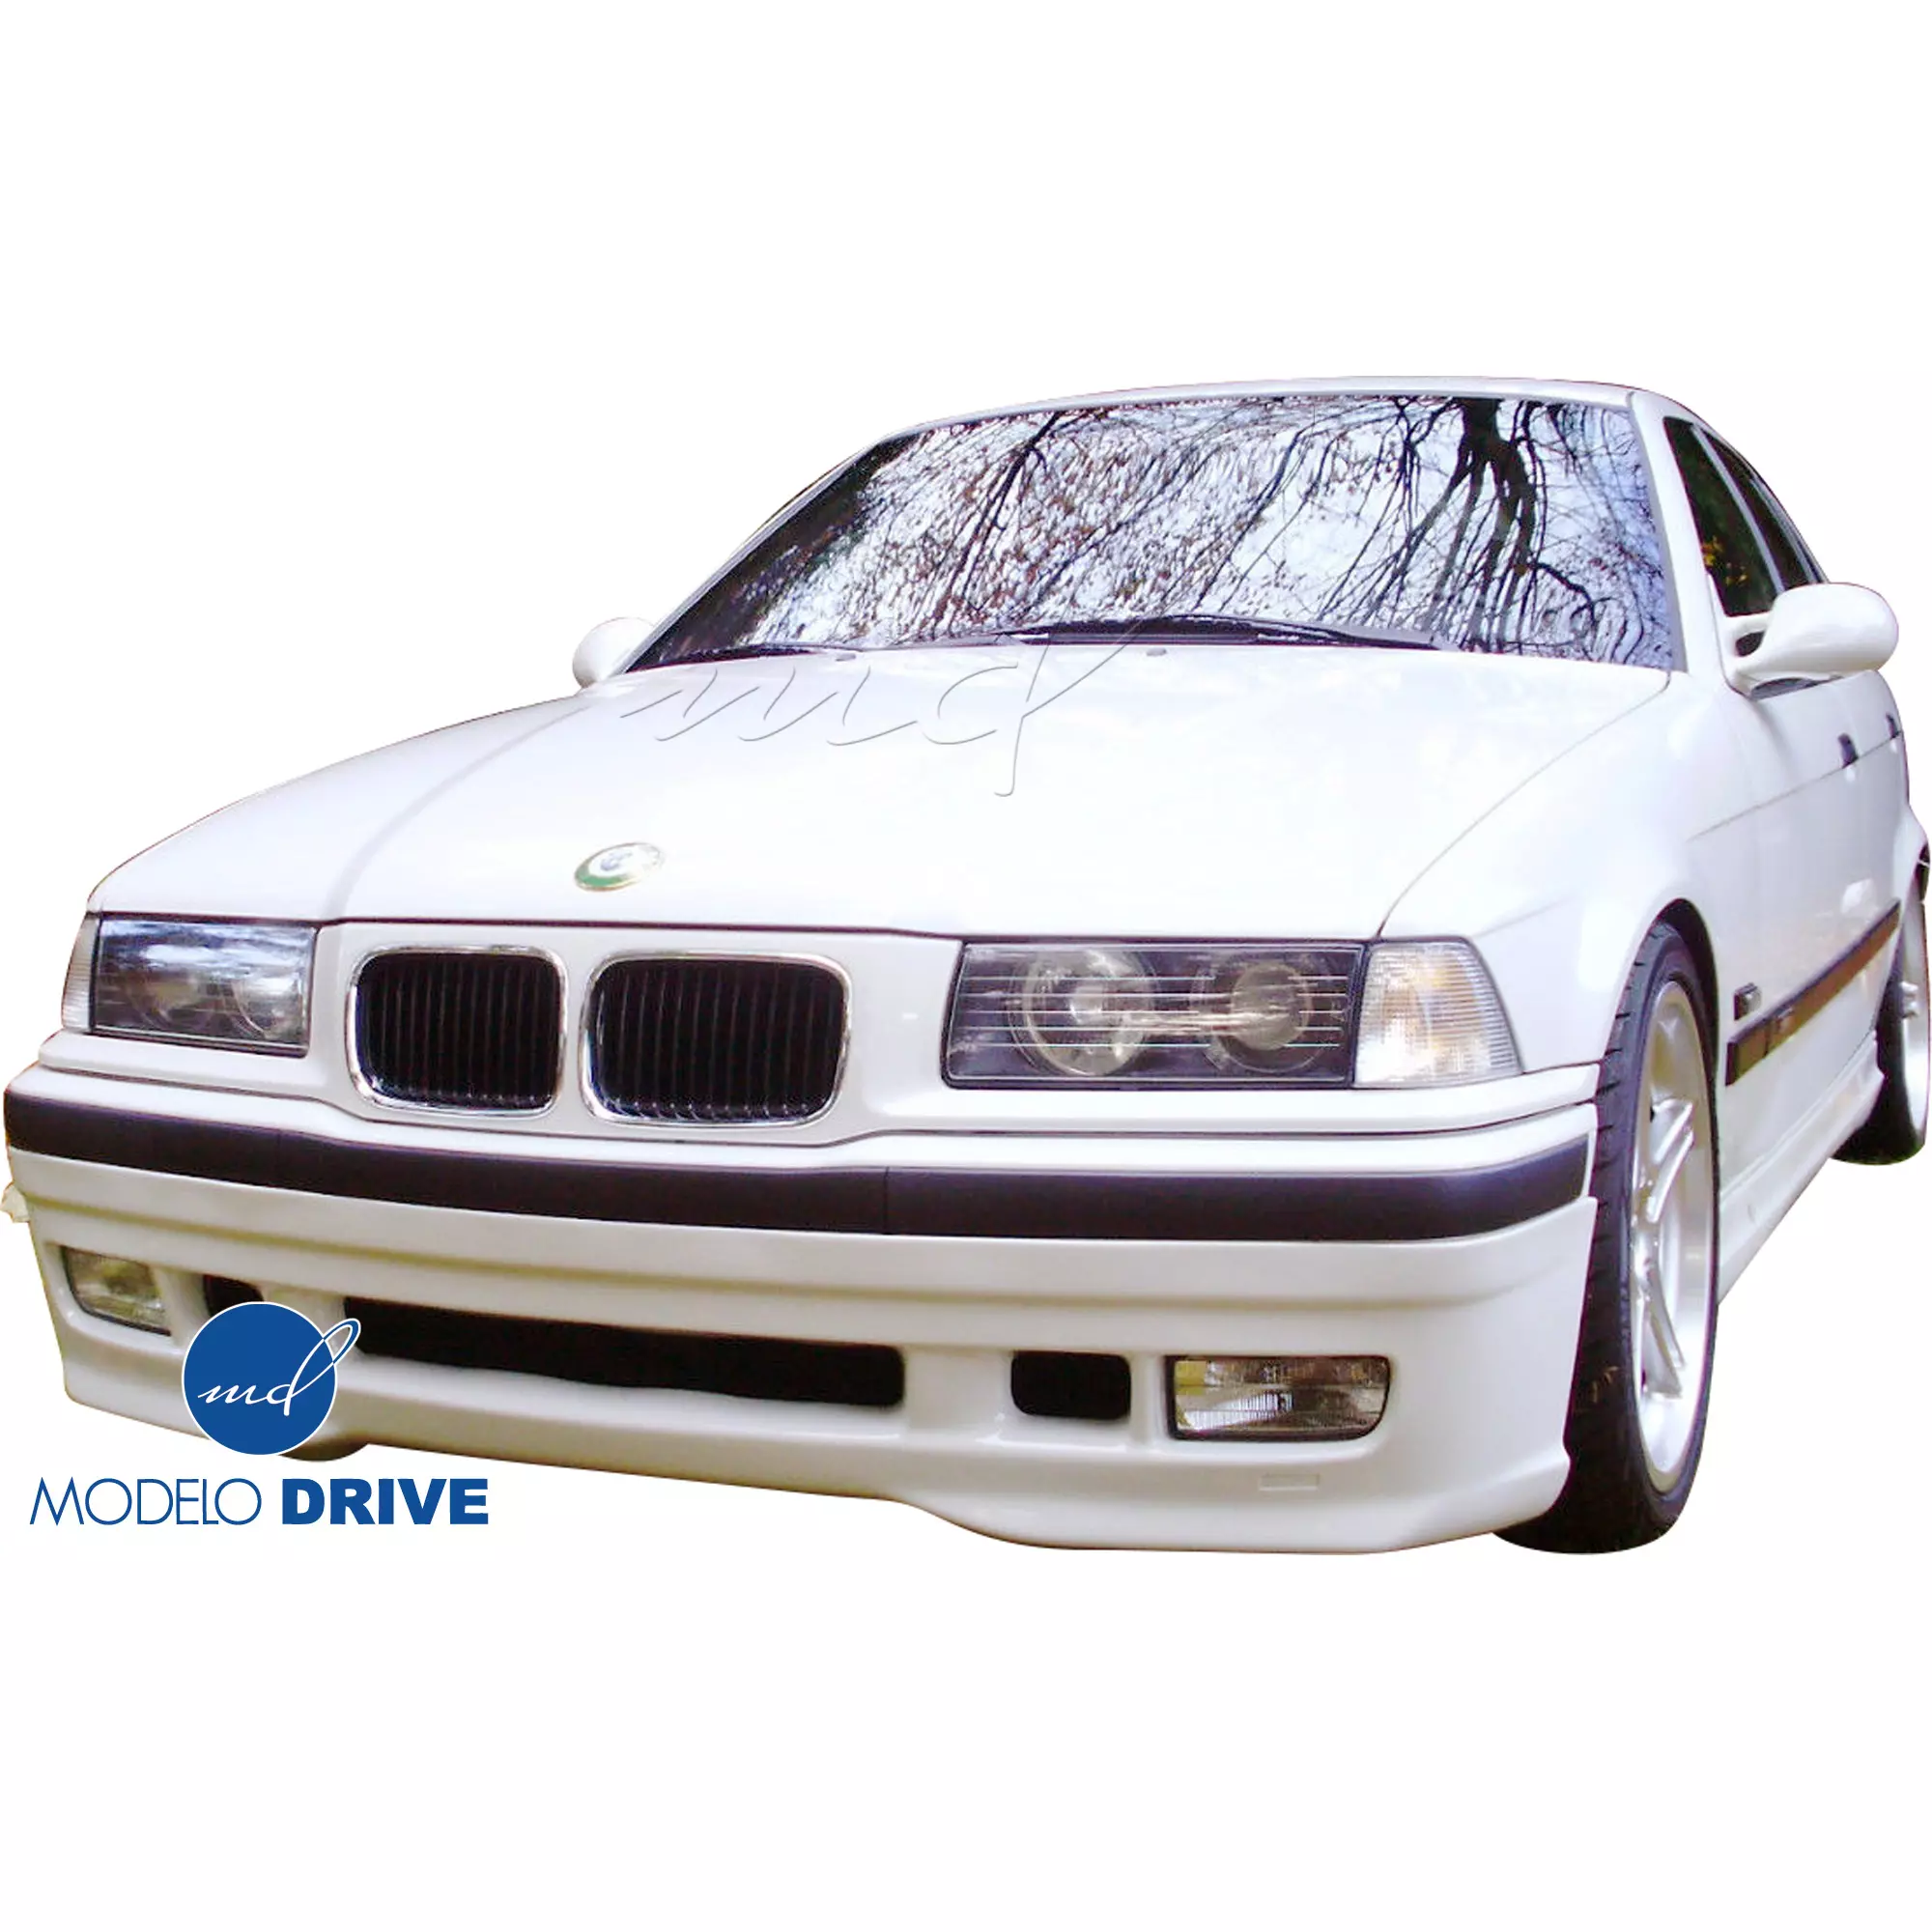 ModeloDrive FRP RDYN Front Valance Add-on > BMW 3-Series E36 1992-1998 > 2/4dr - Image 2